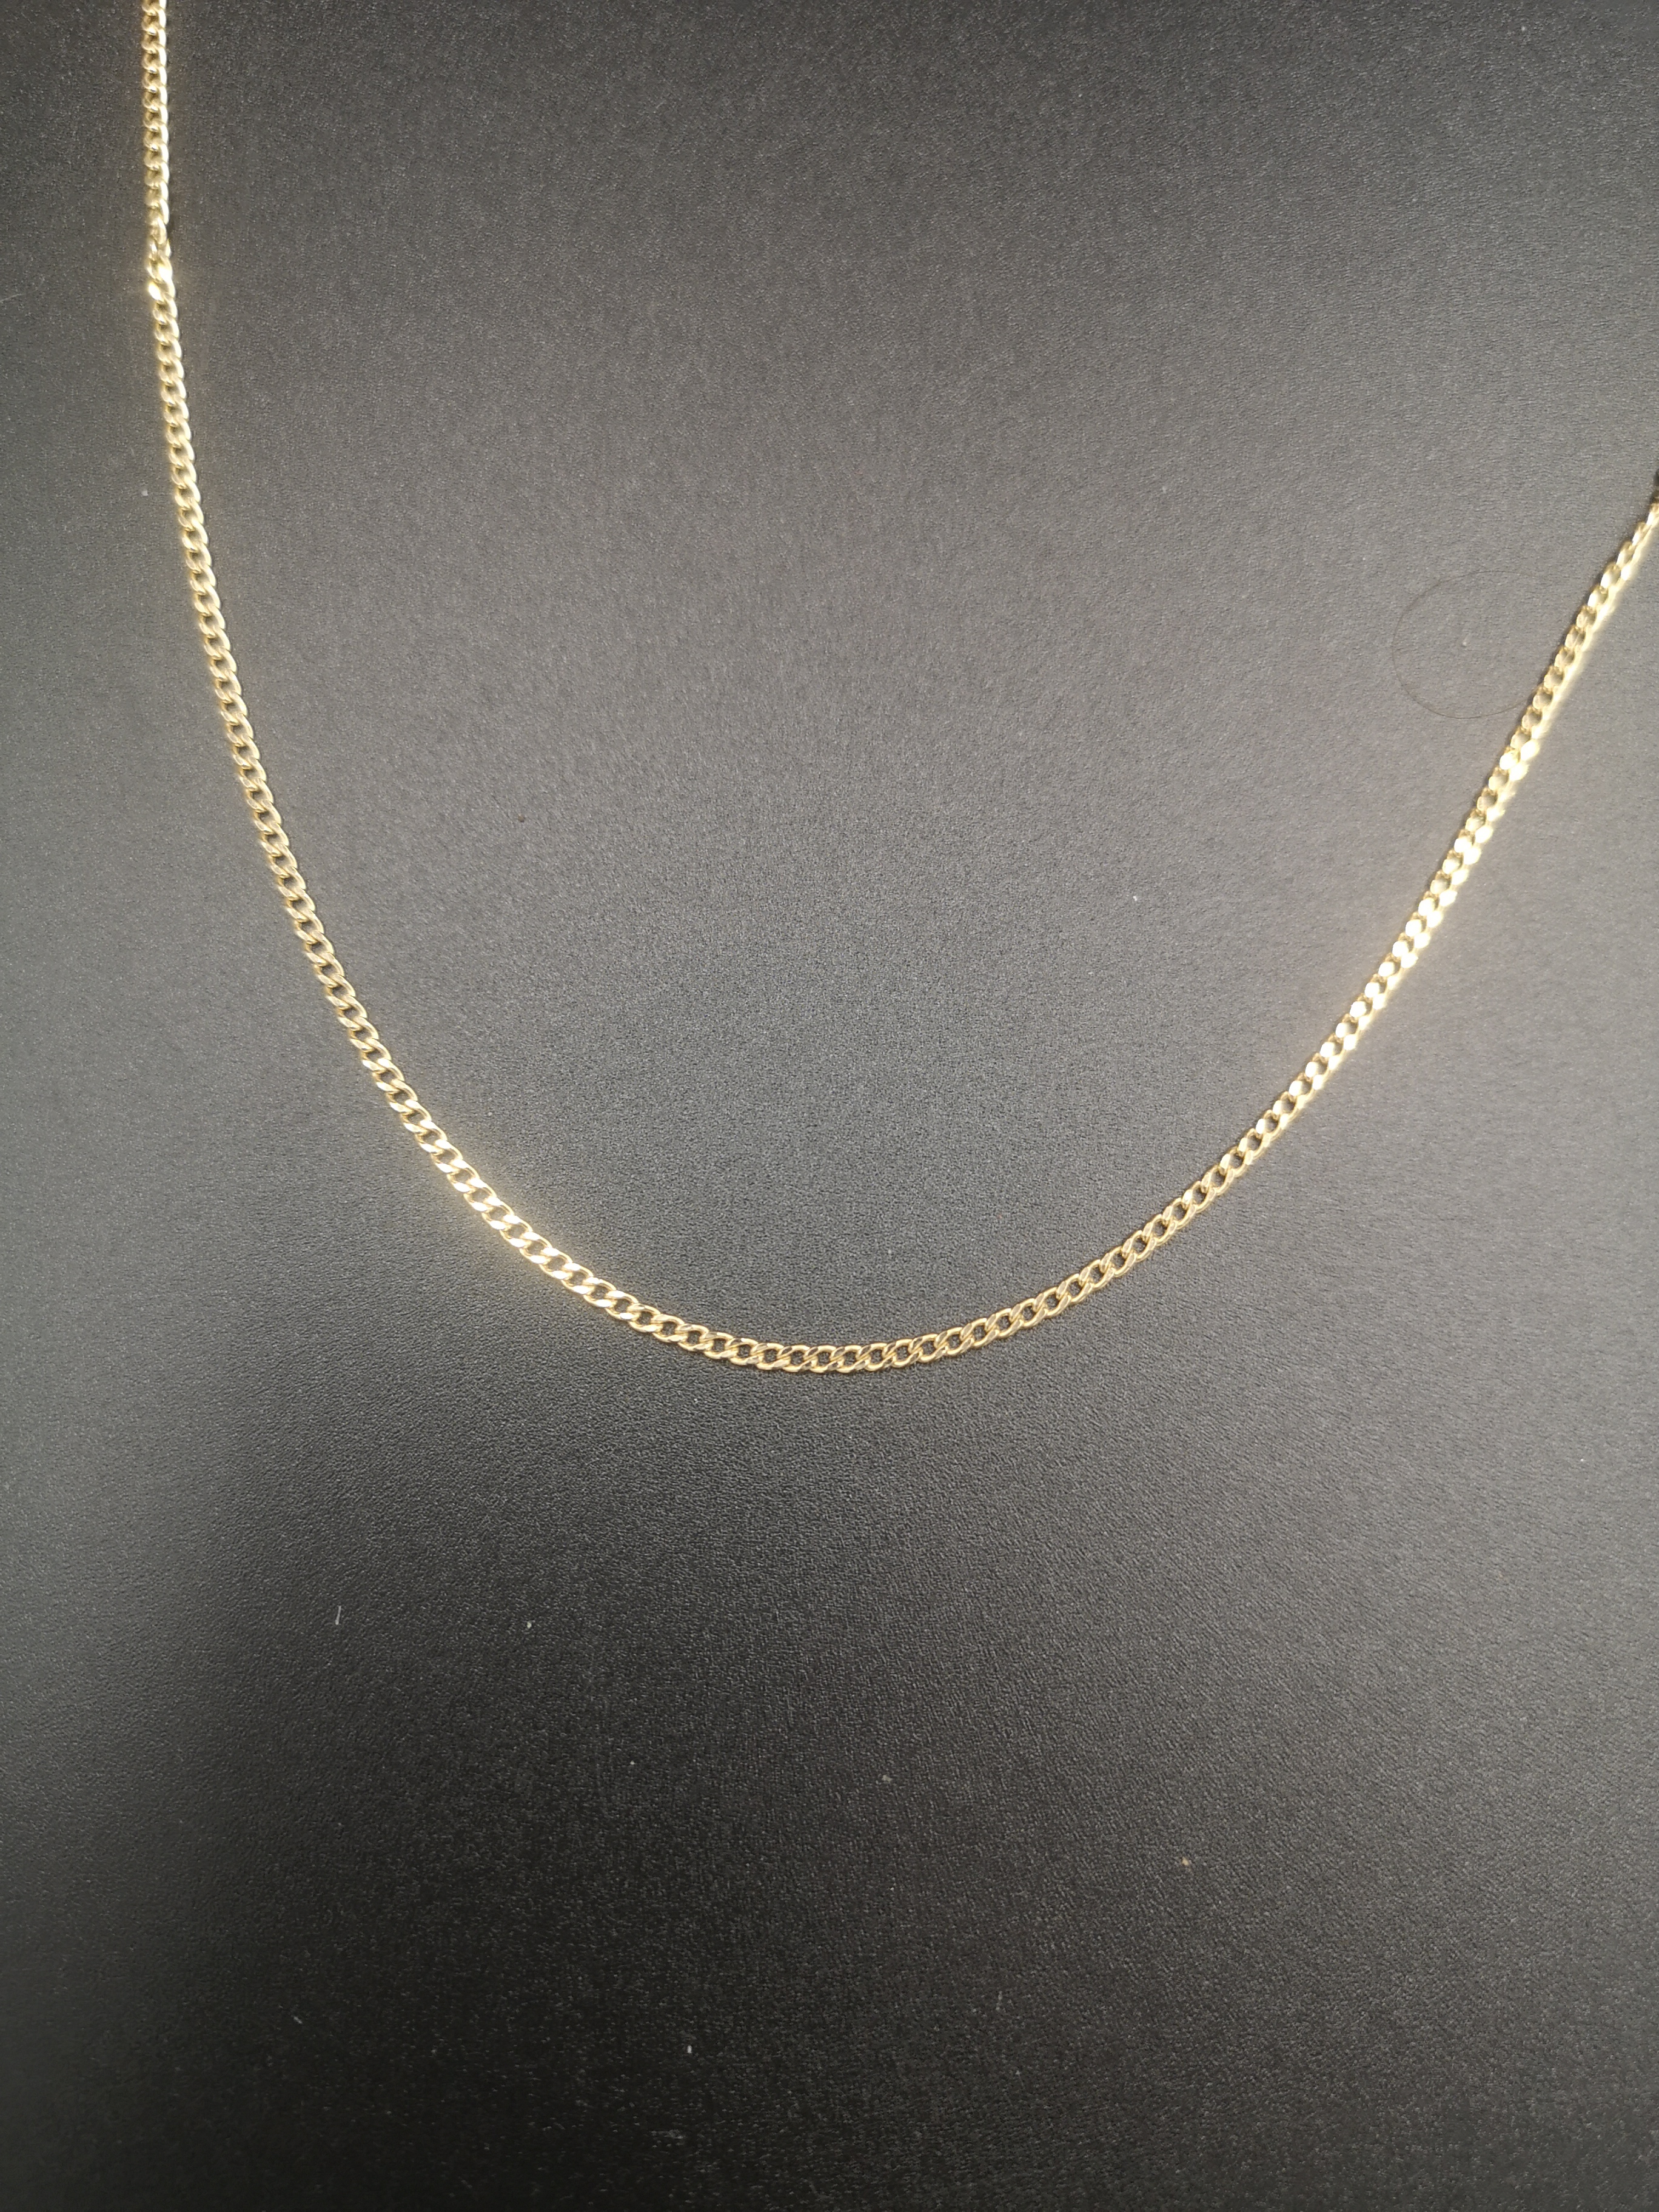 9ct gold chain - Image 2 of 4